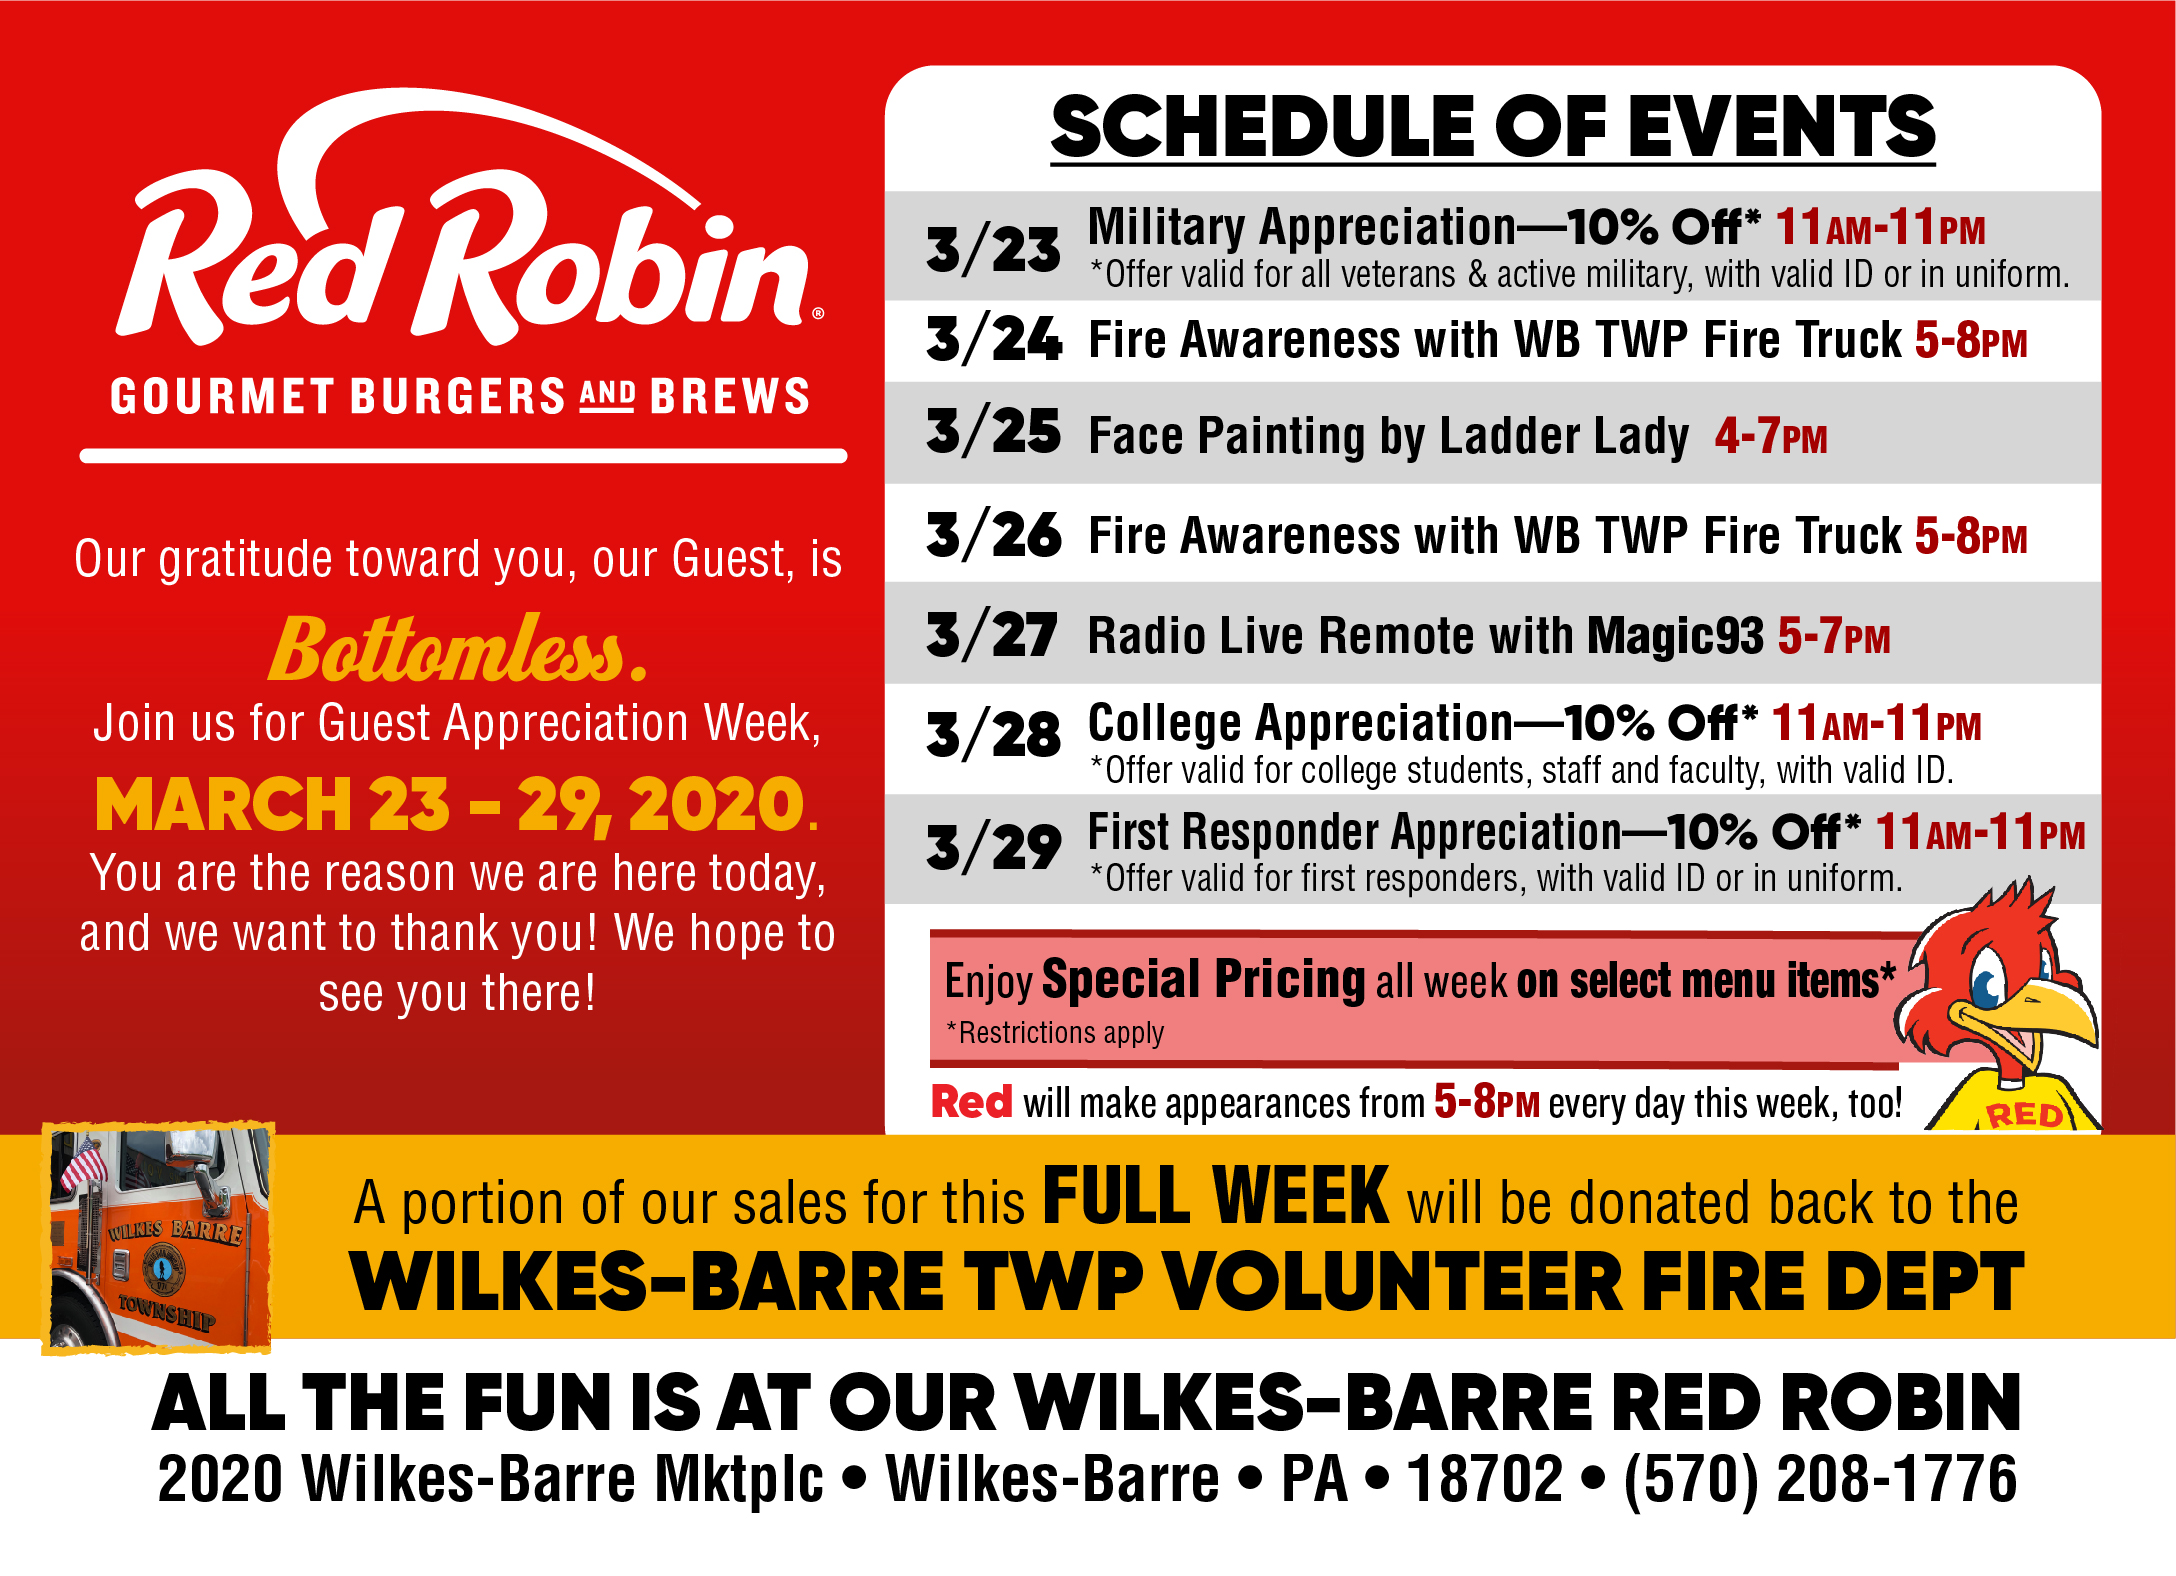 Schedule of events and offering's for Wilkes-Barre Red Robin's Guest Appreciation Week, March 23-29, 2020.